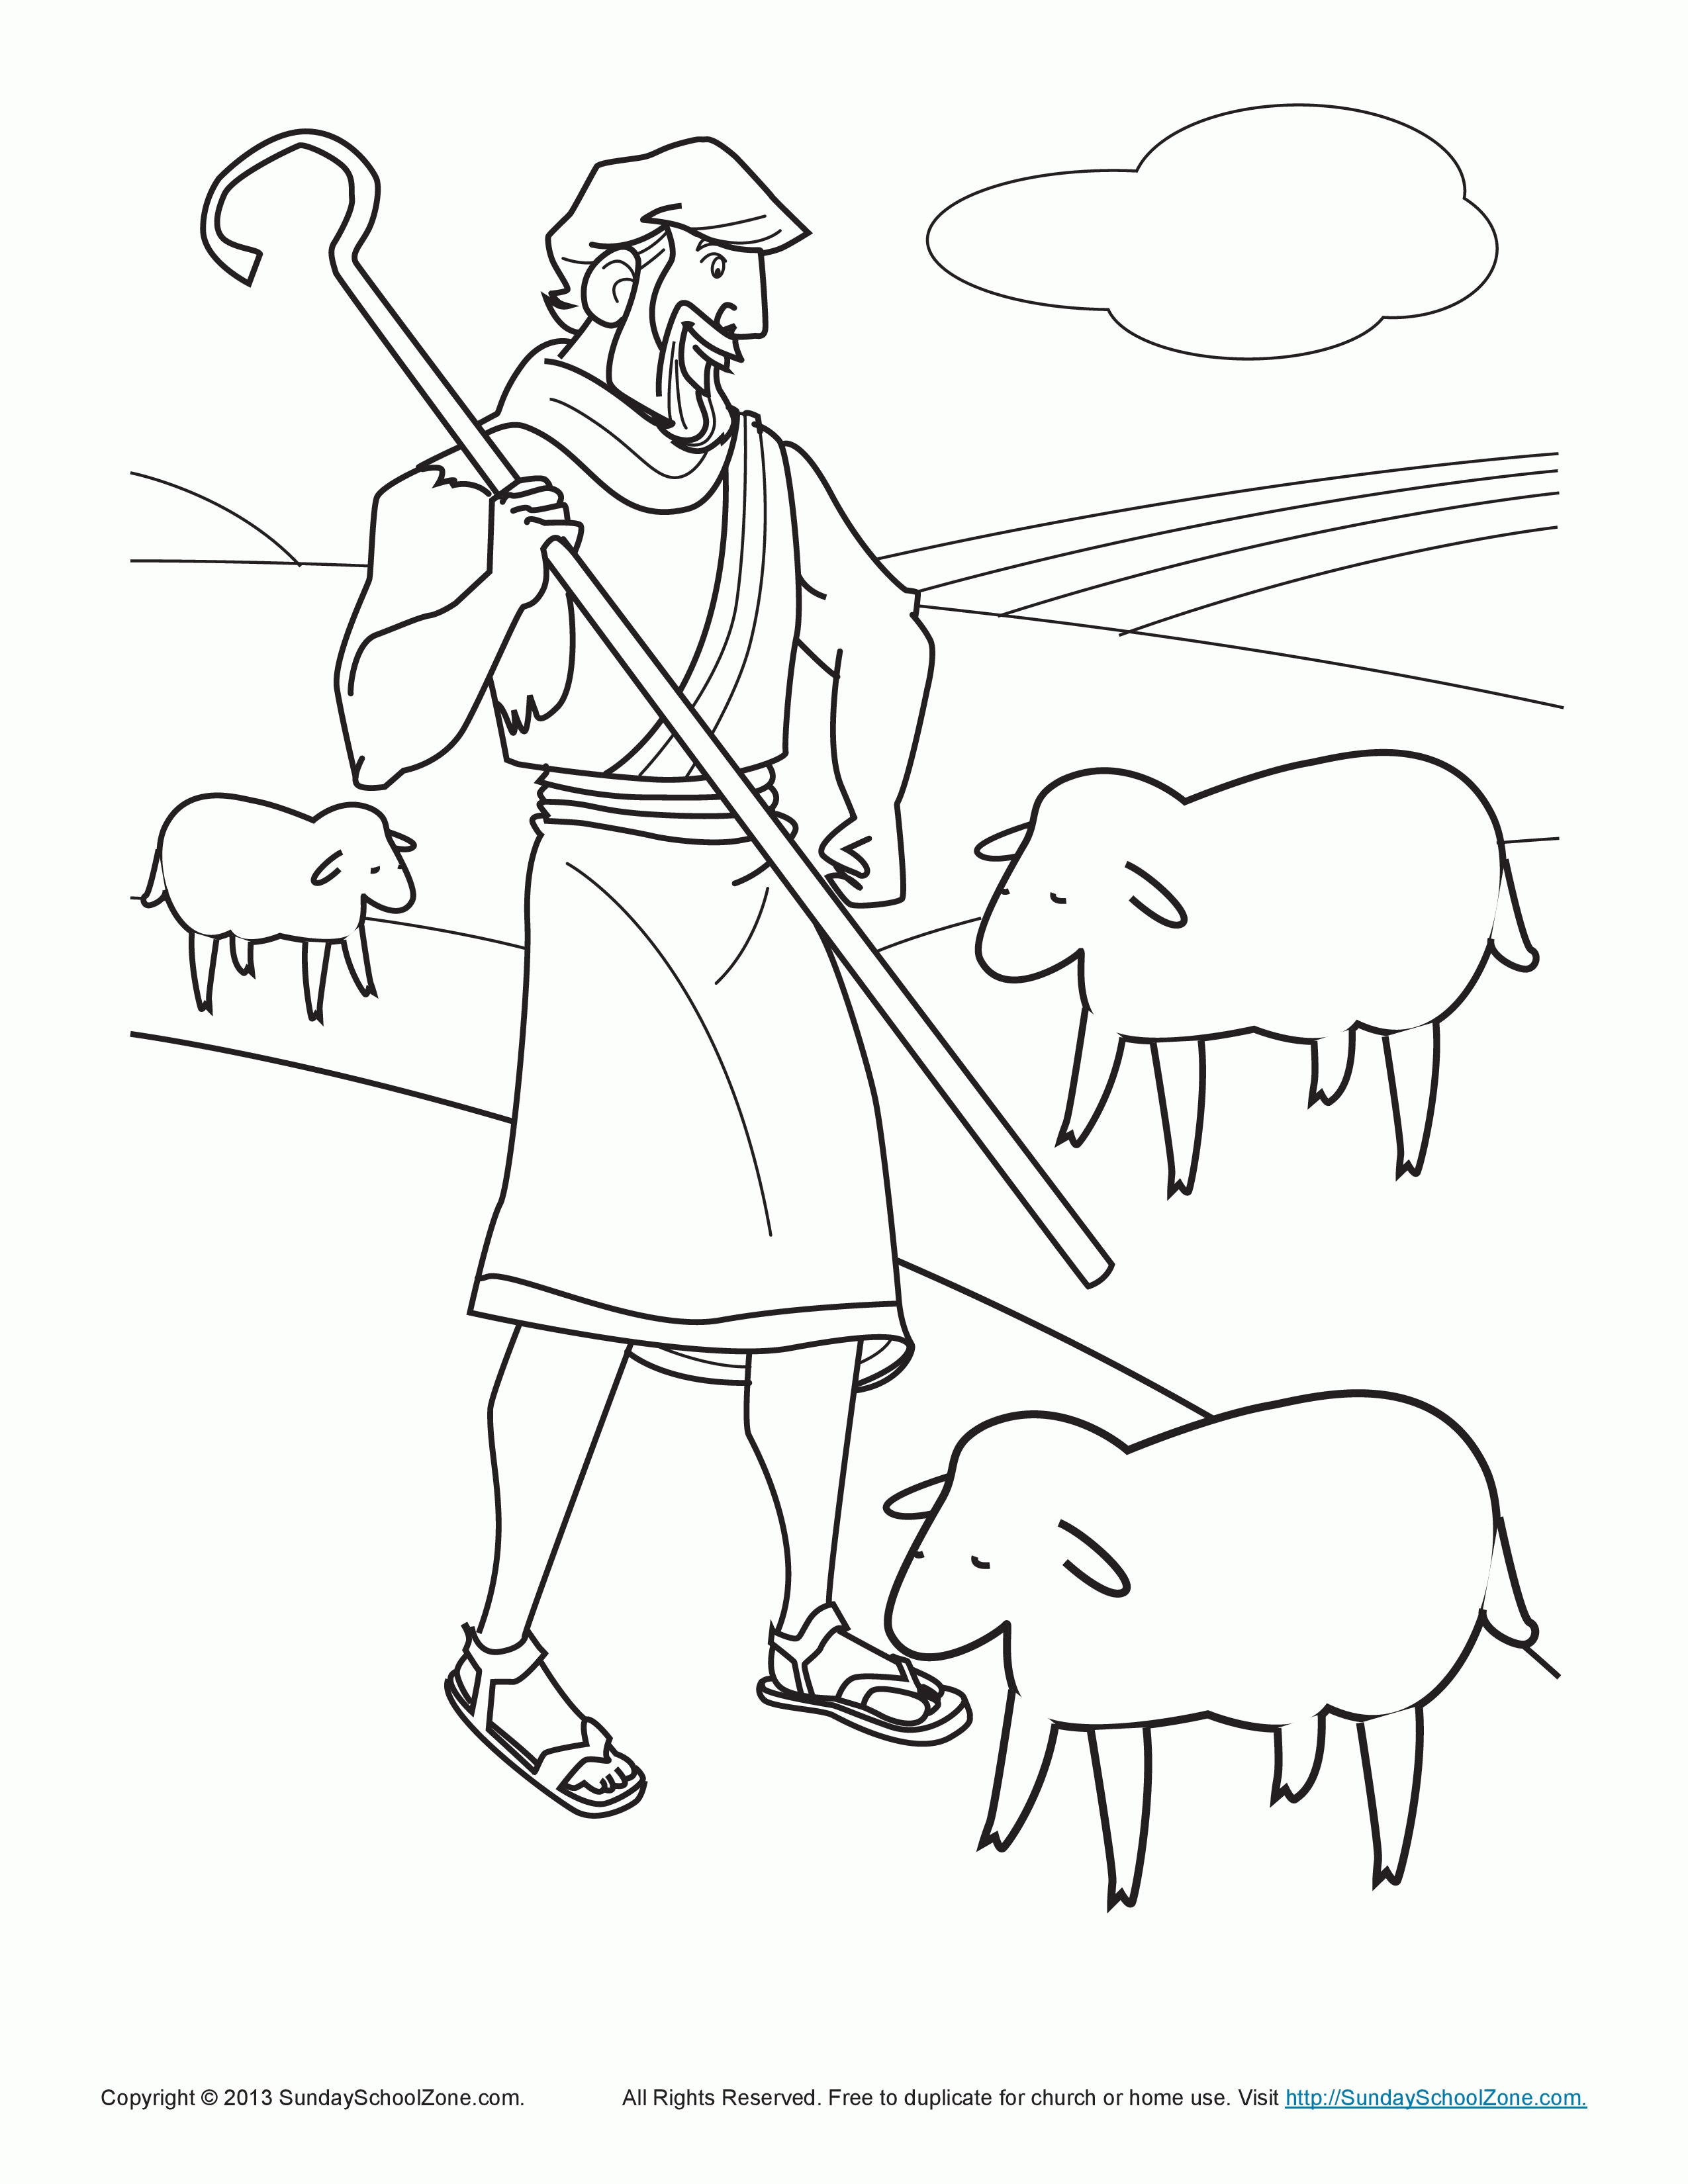 Coloring Page Of Sheep And Shepherds - High Quality Coloring Pages